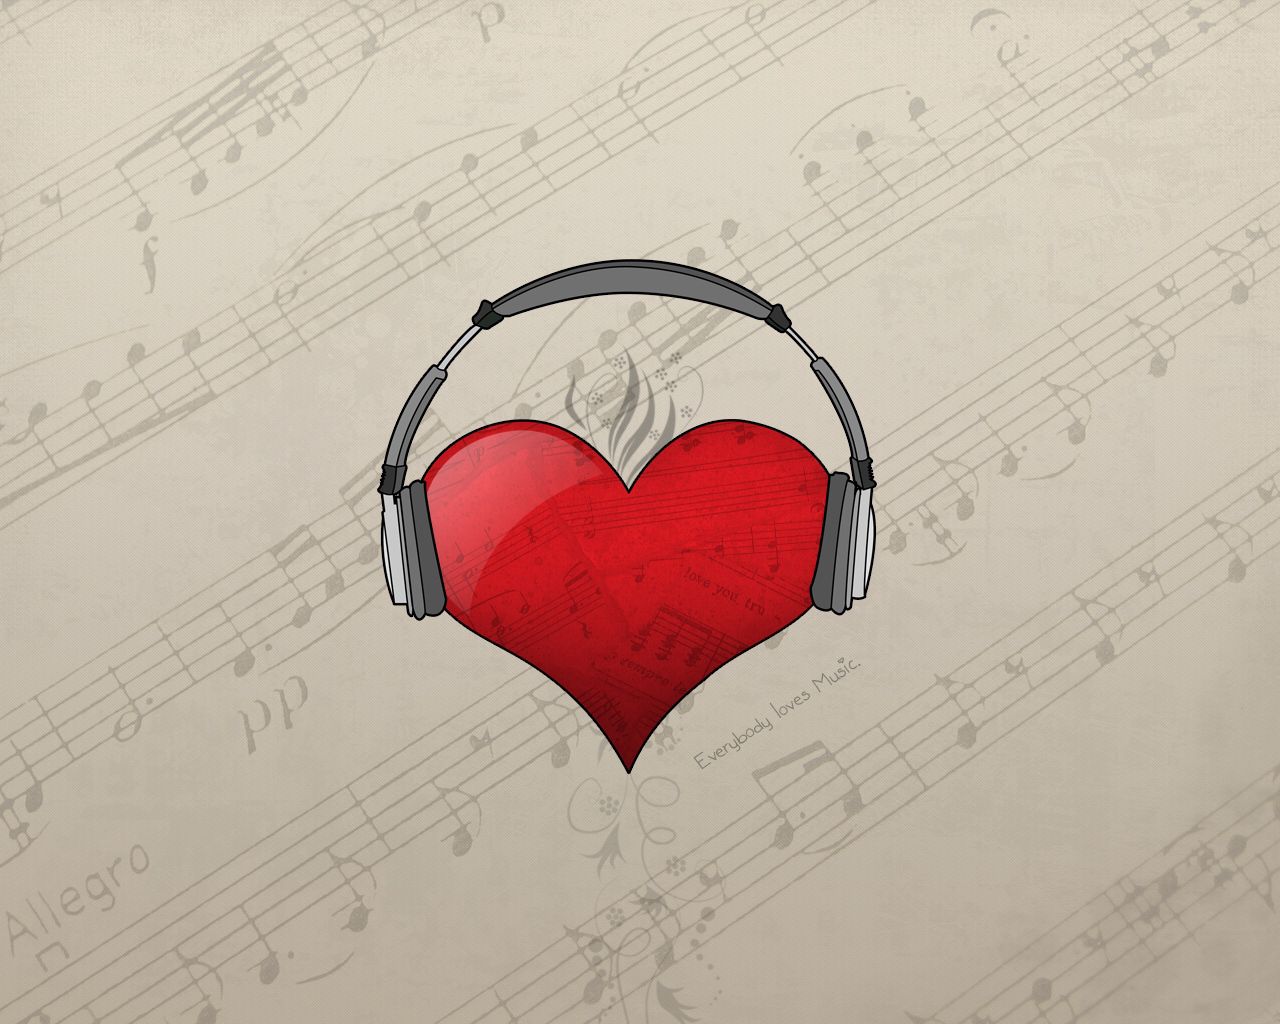 headphones, love, red, picture, drawing, heart 1080p